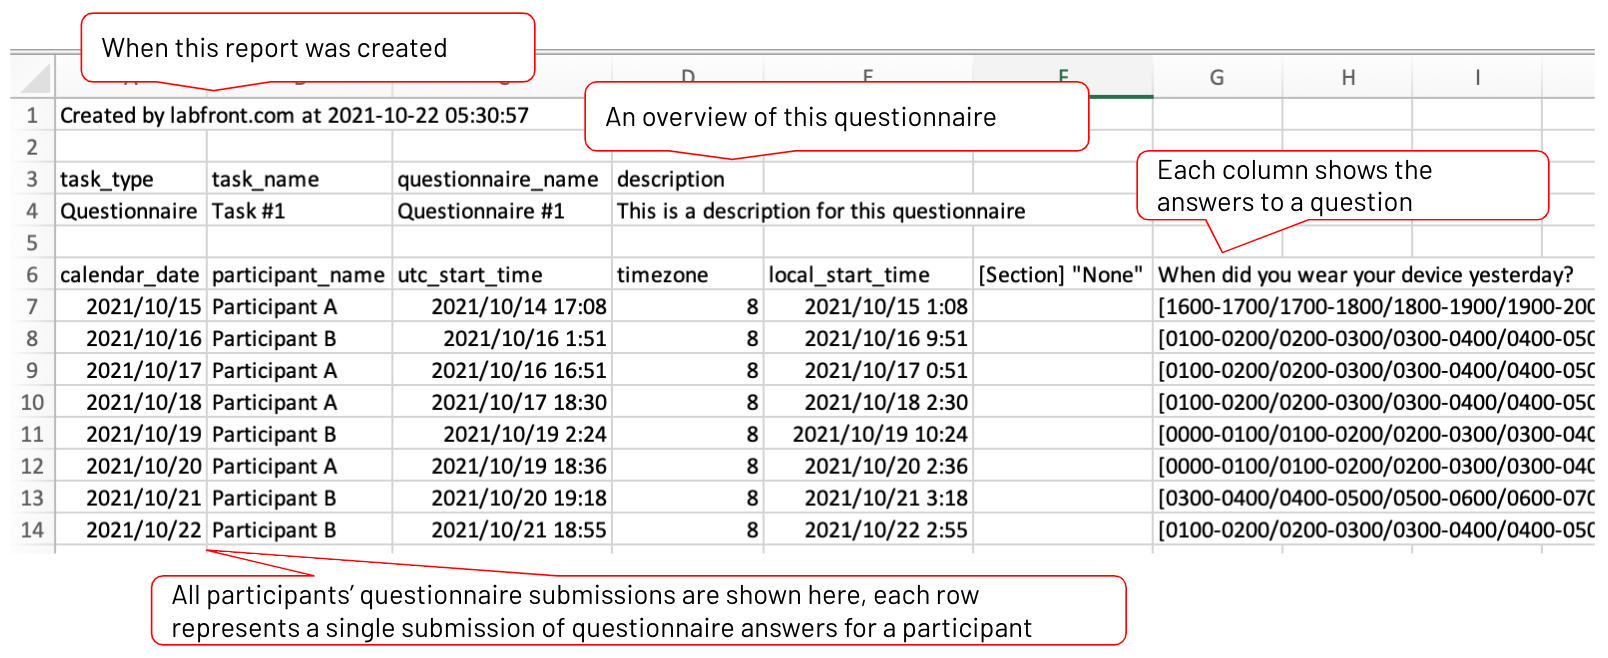 CSV file of questionnaire data with date, overview, and participant's submissions 